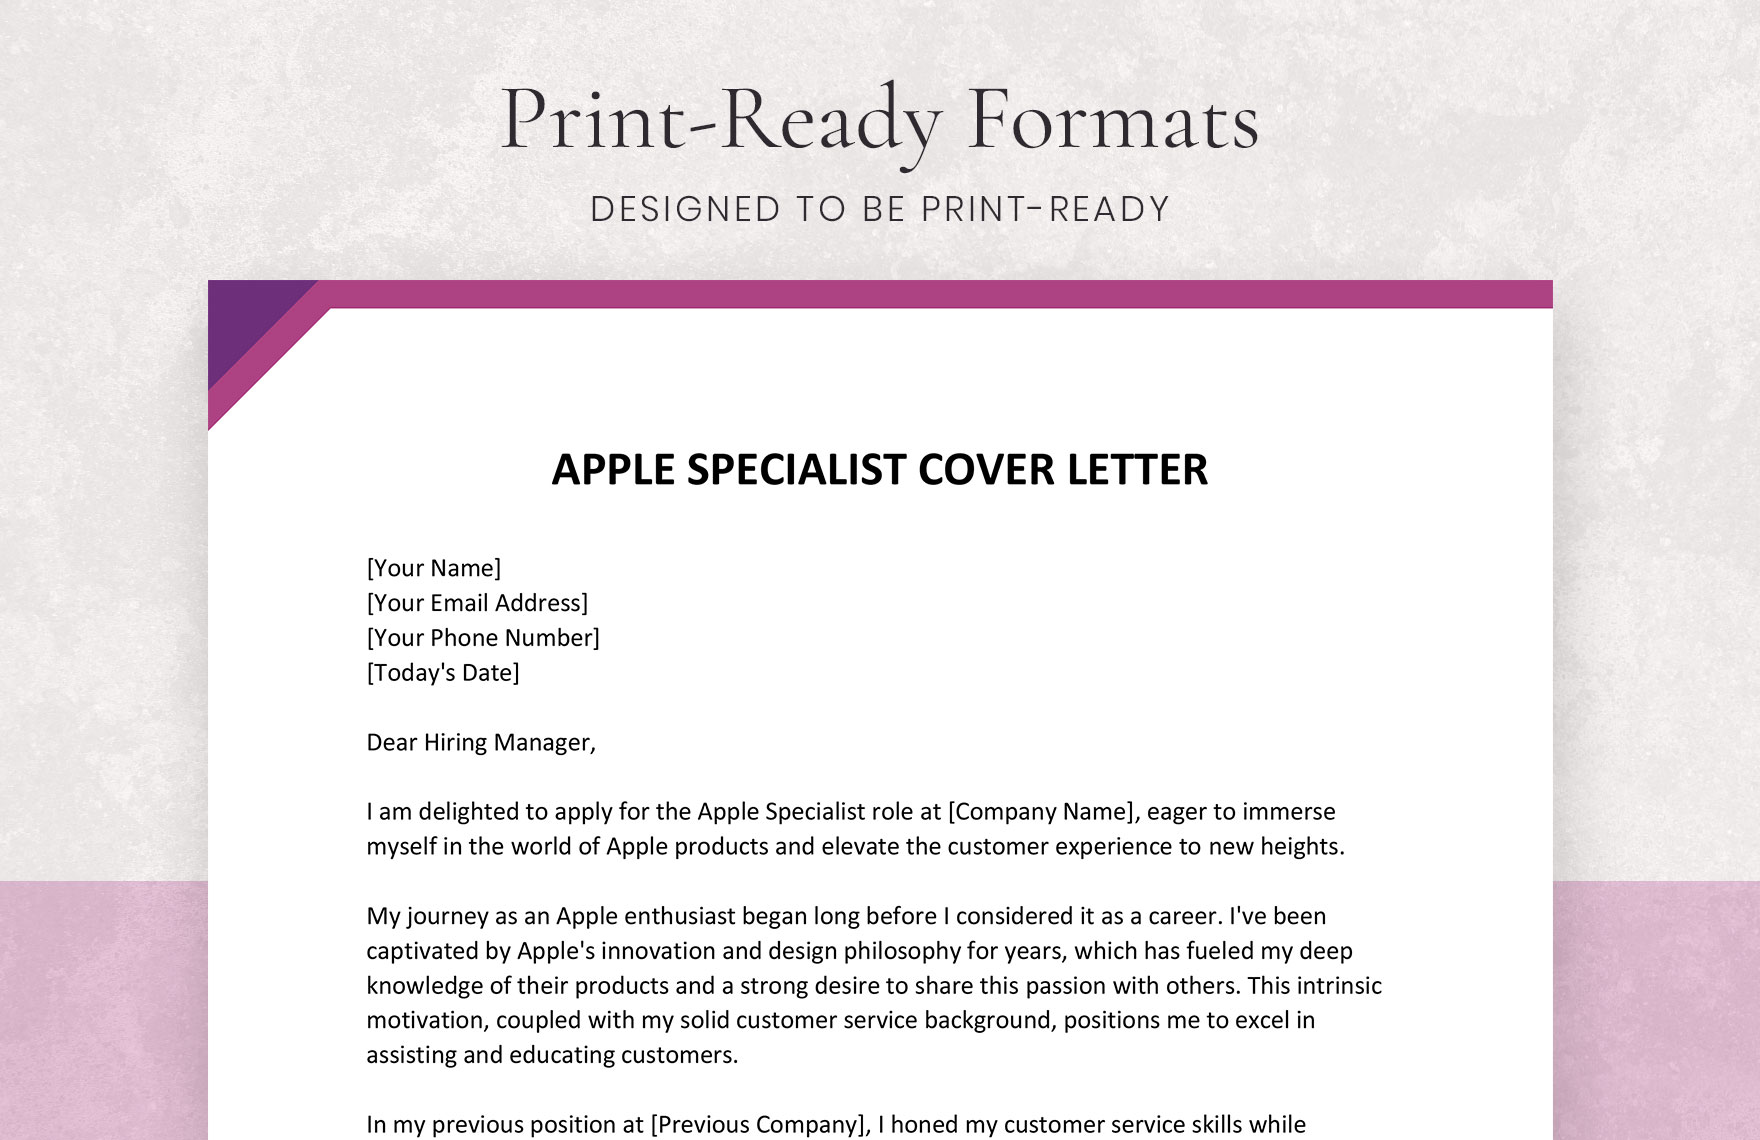 Apple Specialist Cover Letter